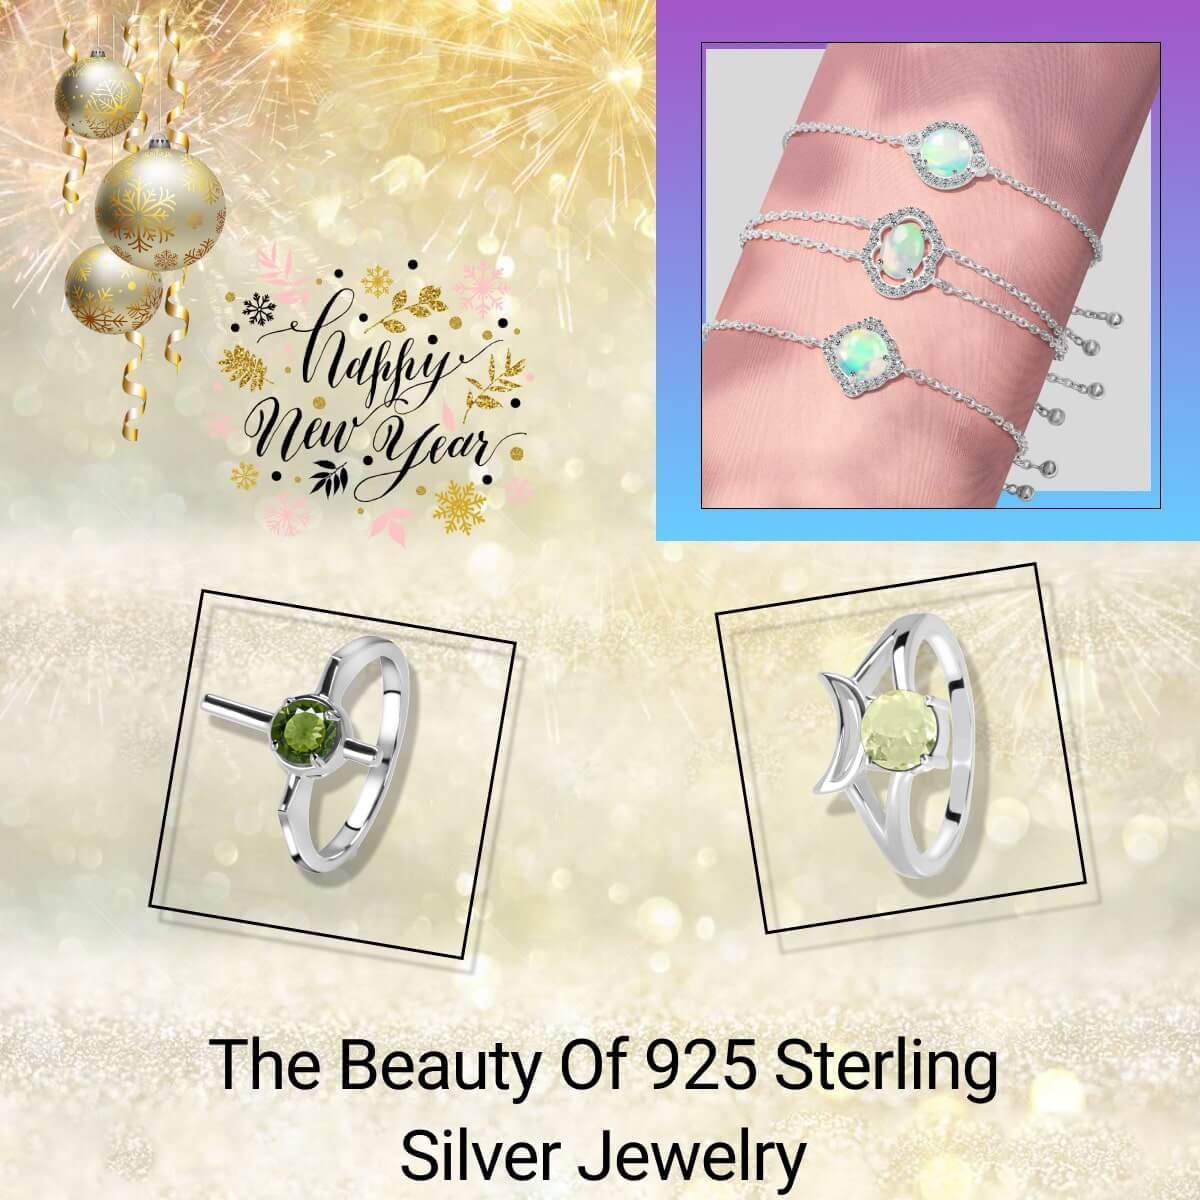 Why 925 Sterling Silver Jewelry